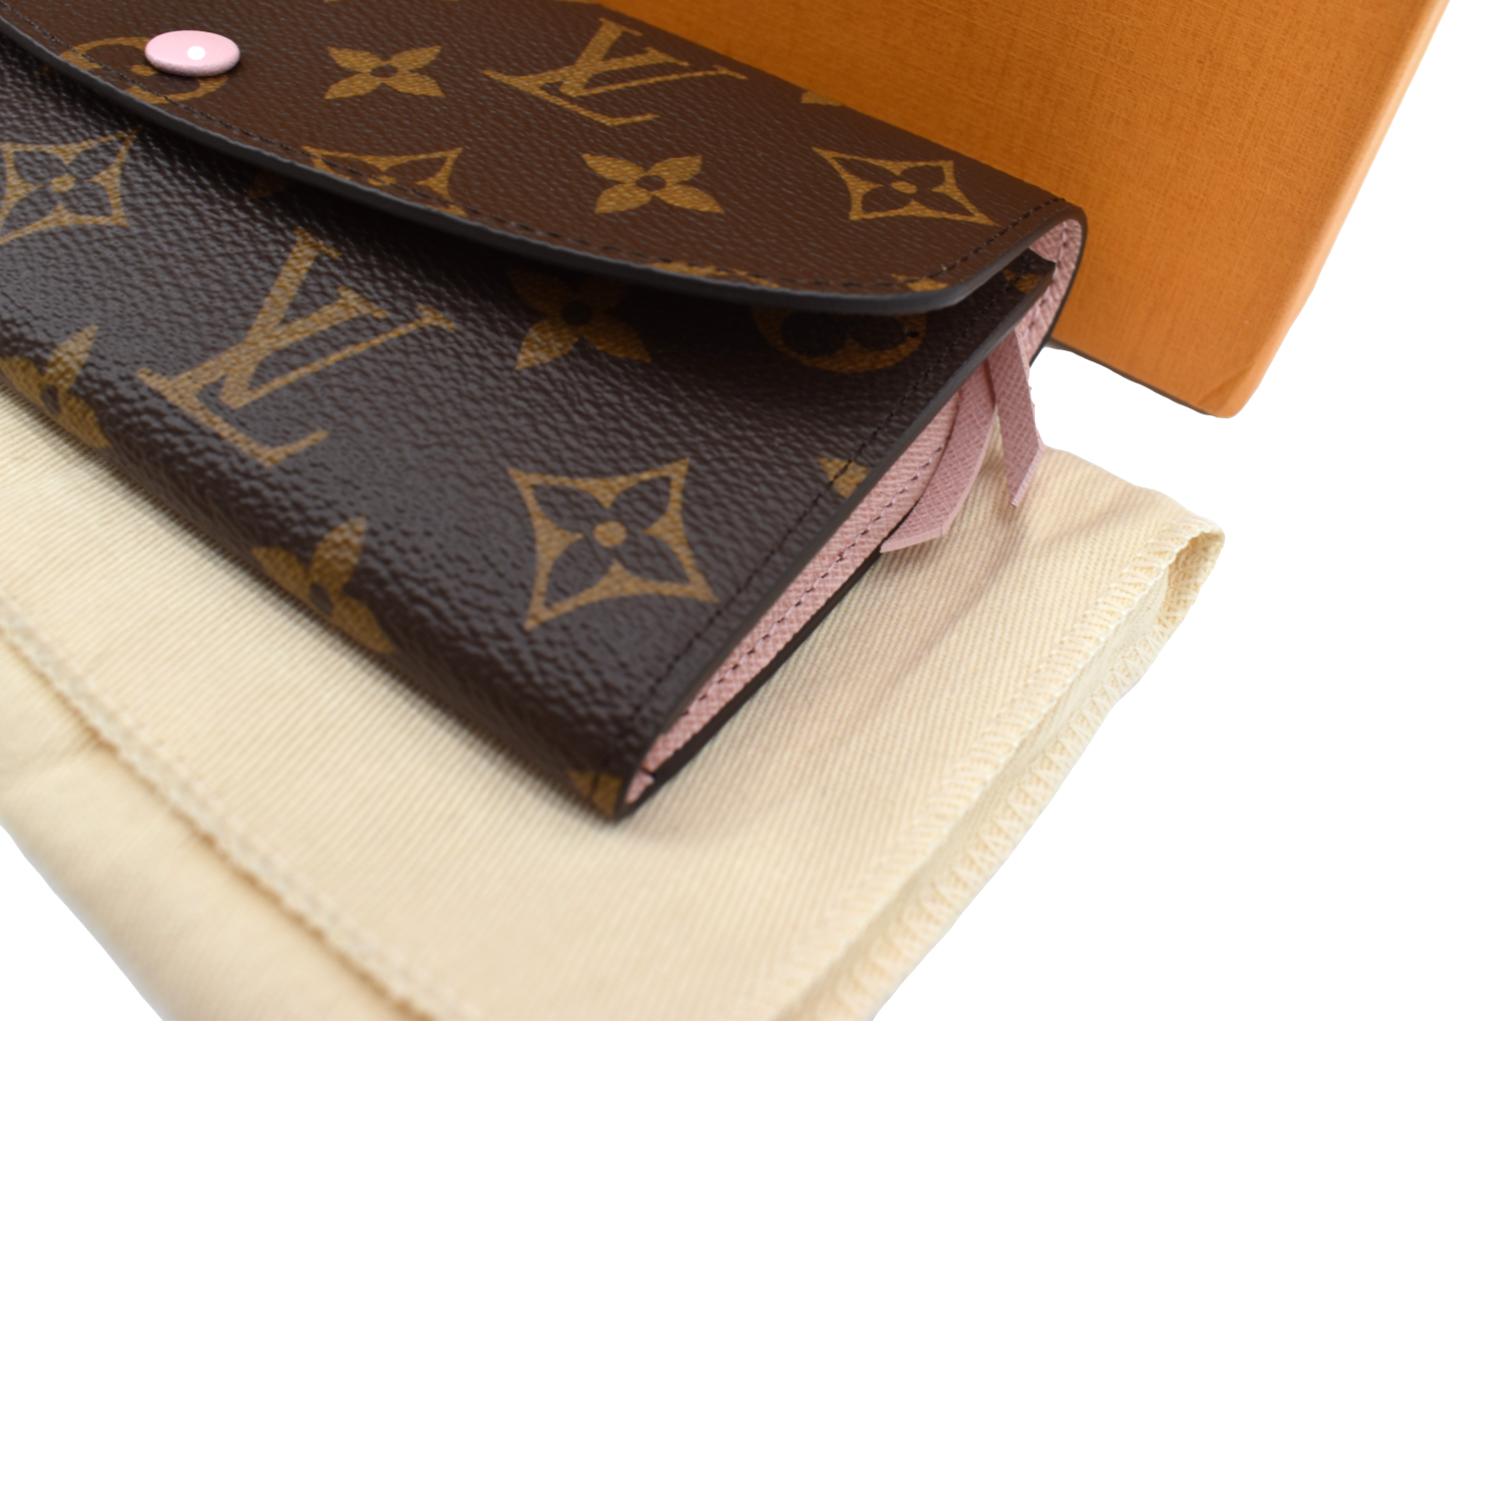 Emilie Wallet Monogram Canvas - Wallets and Small Leather Goods M61289